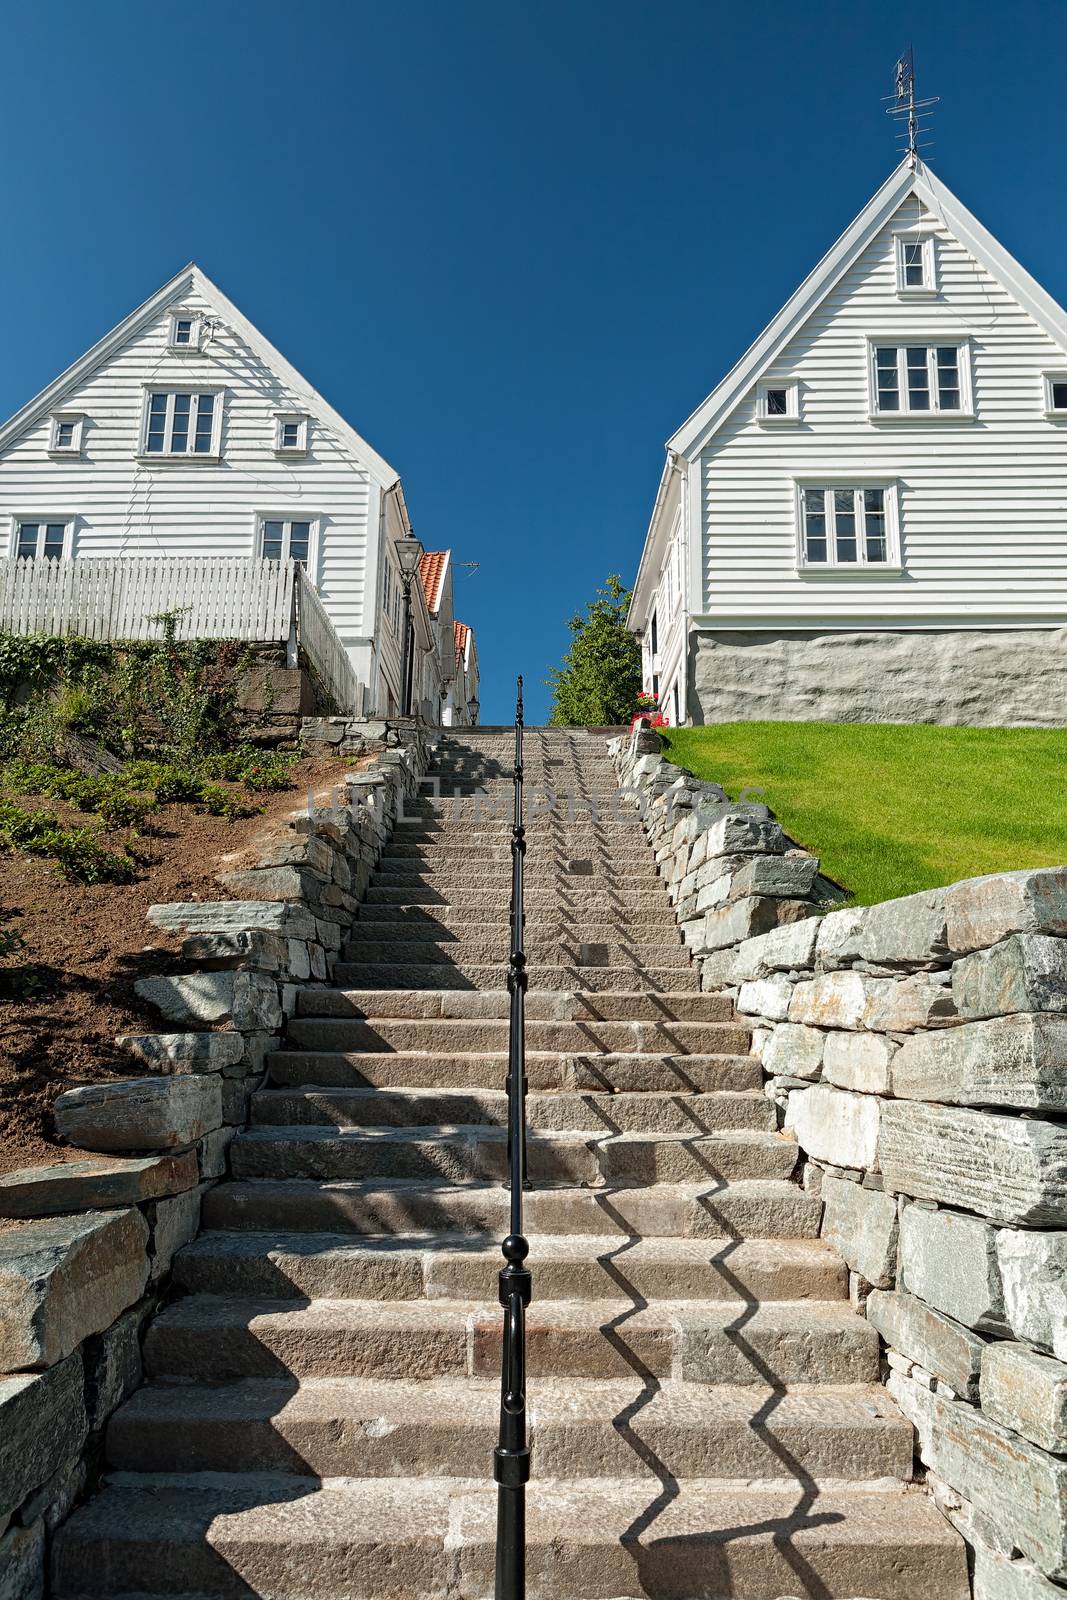 Typical houses and stairs seen from below in Stavanger, Norway